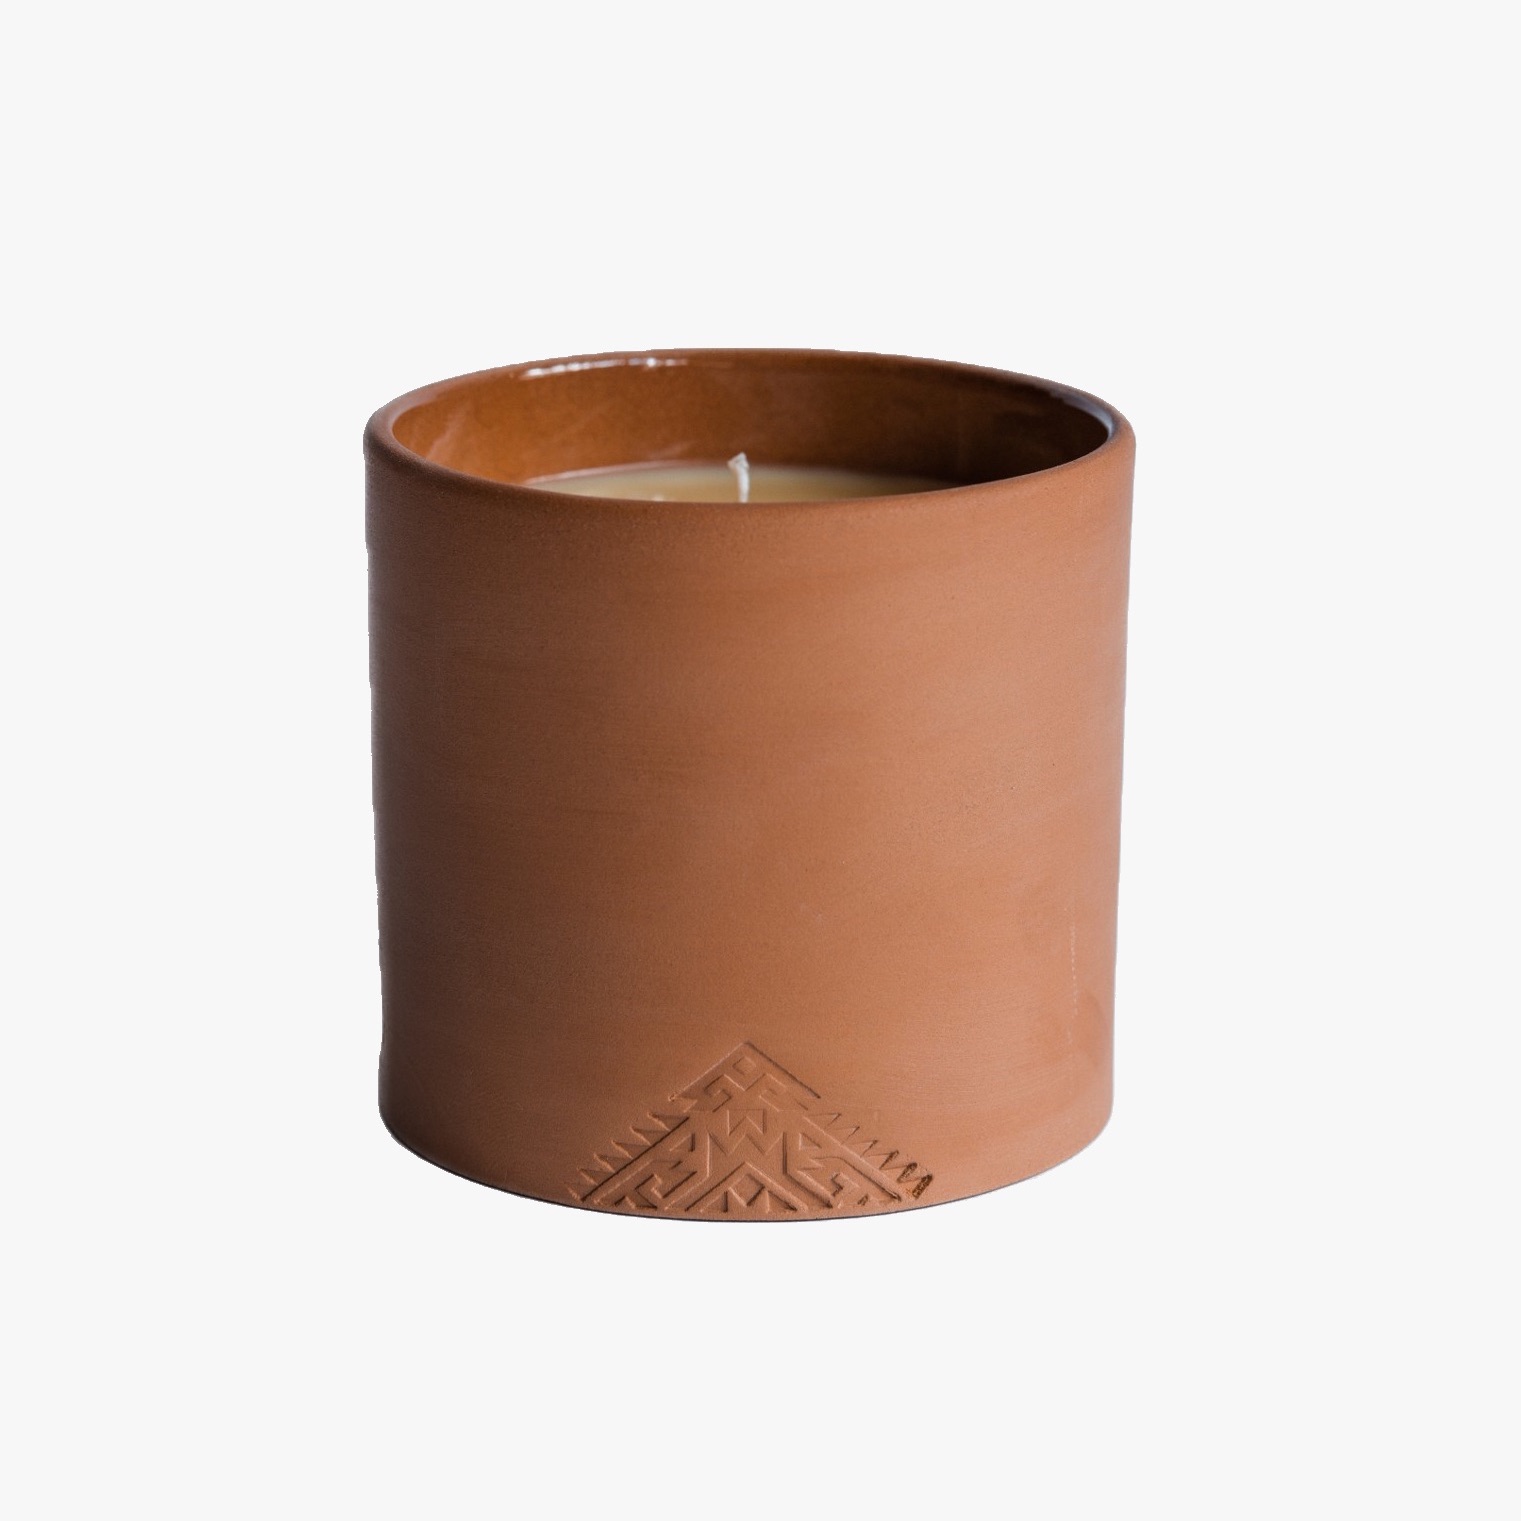 The Very Good Candle Company Pilton Terracotta Candle